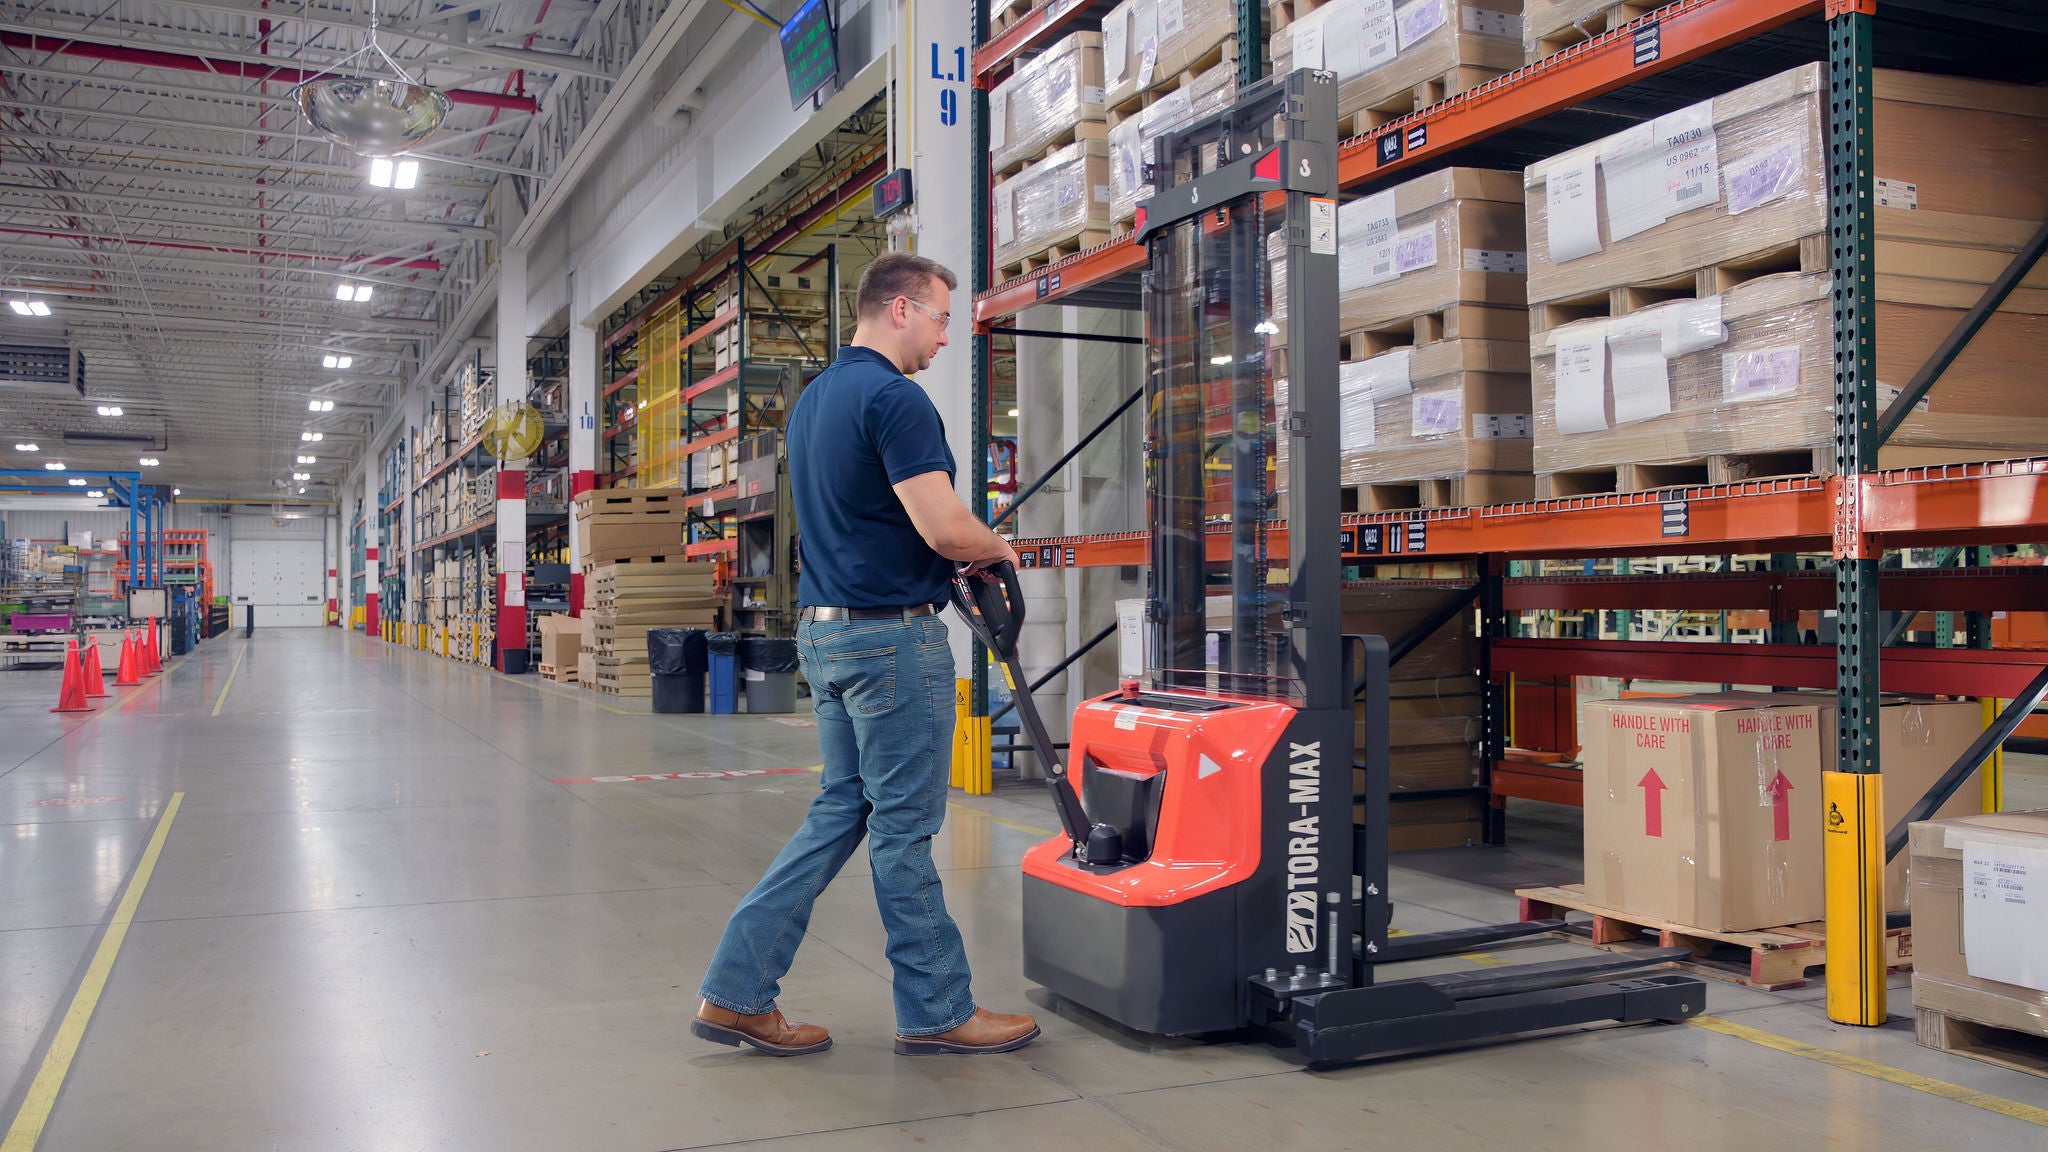 tora-max walkie stacker being used by male about to pick up pallet